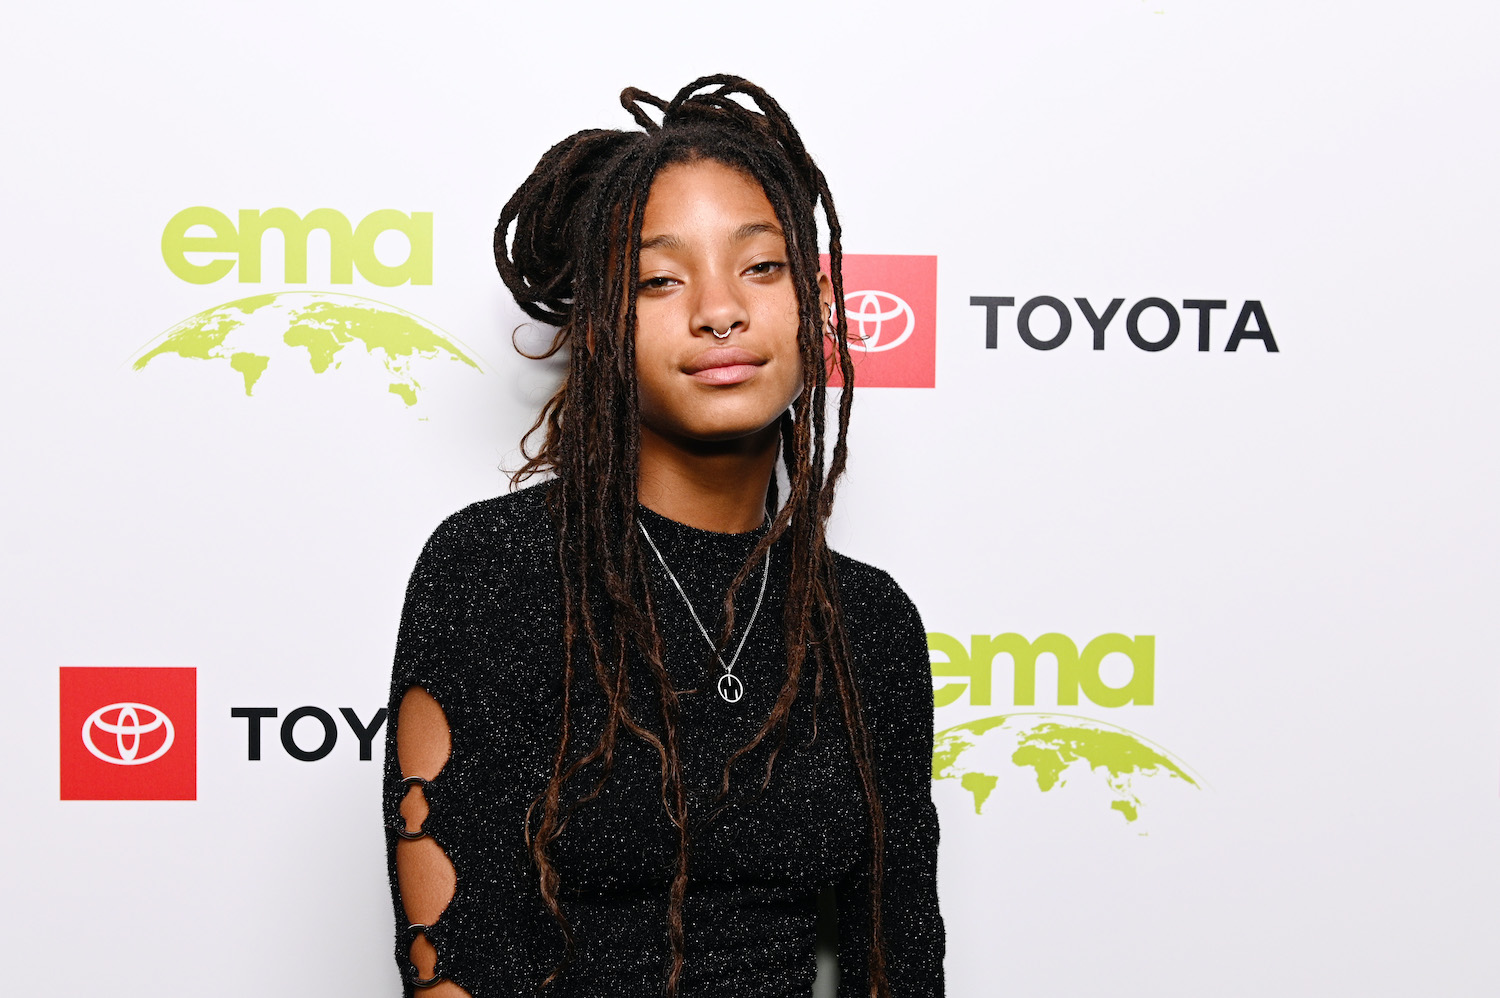 Willow Smith attends the Environmental Media Association 2nd Annual Honors Benefit Gala in 2019